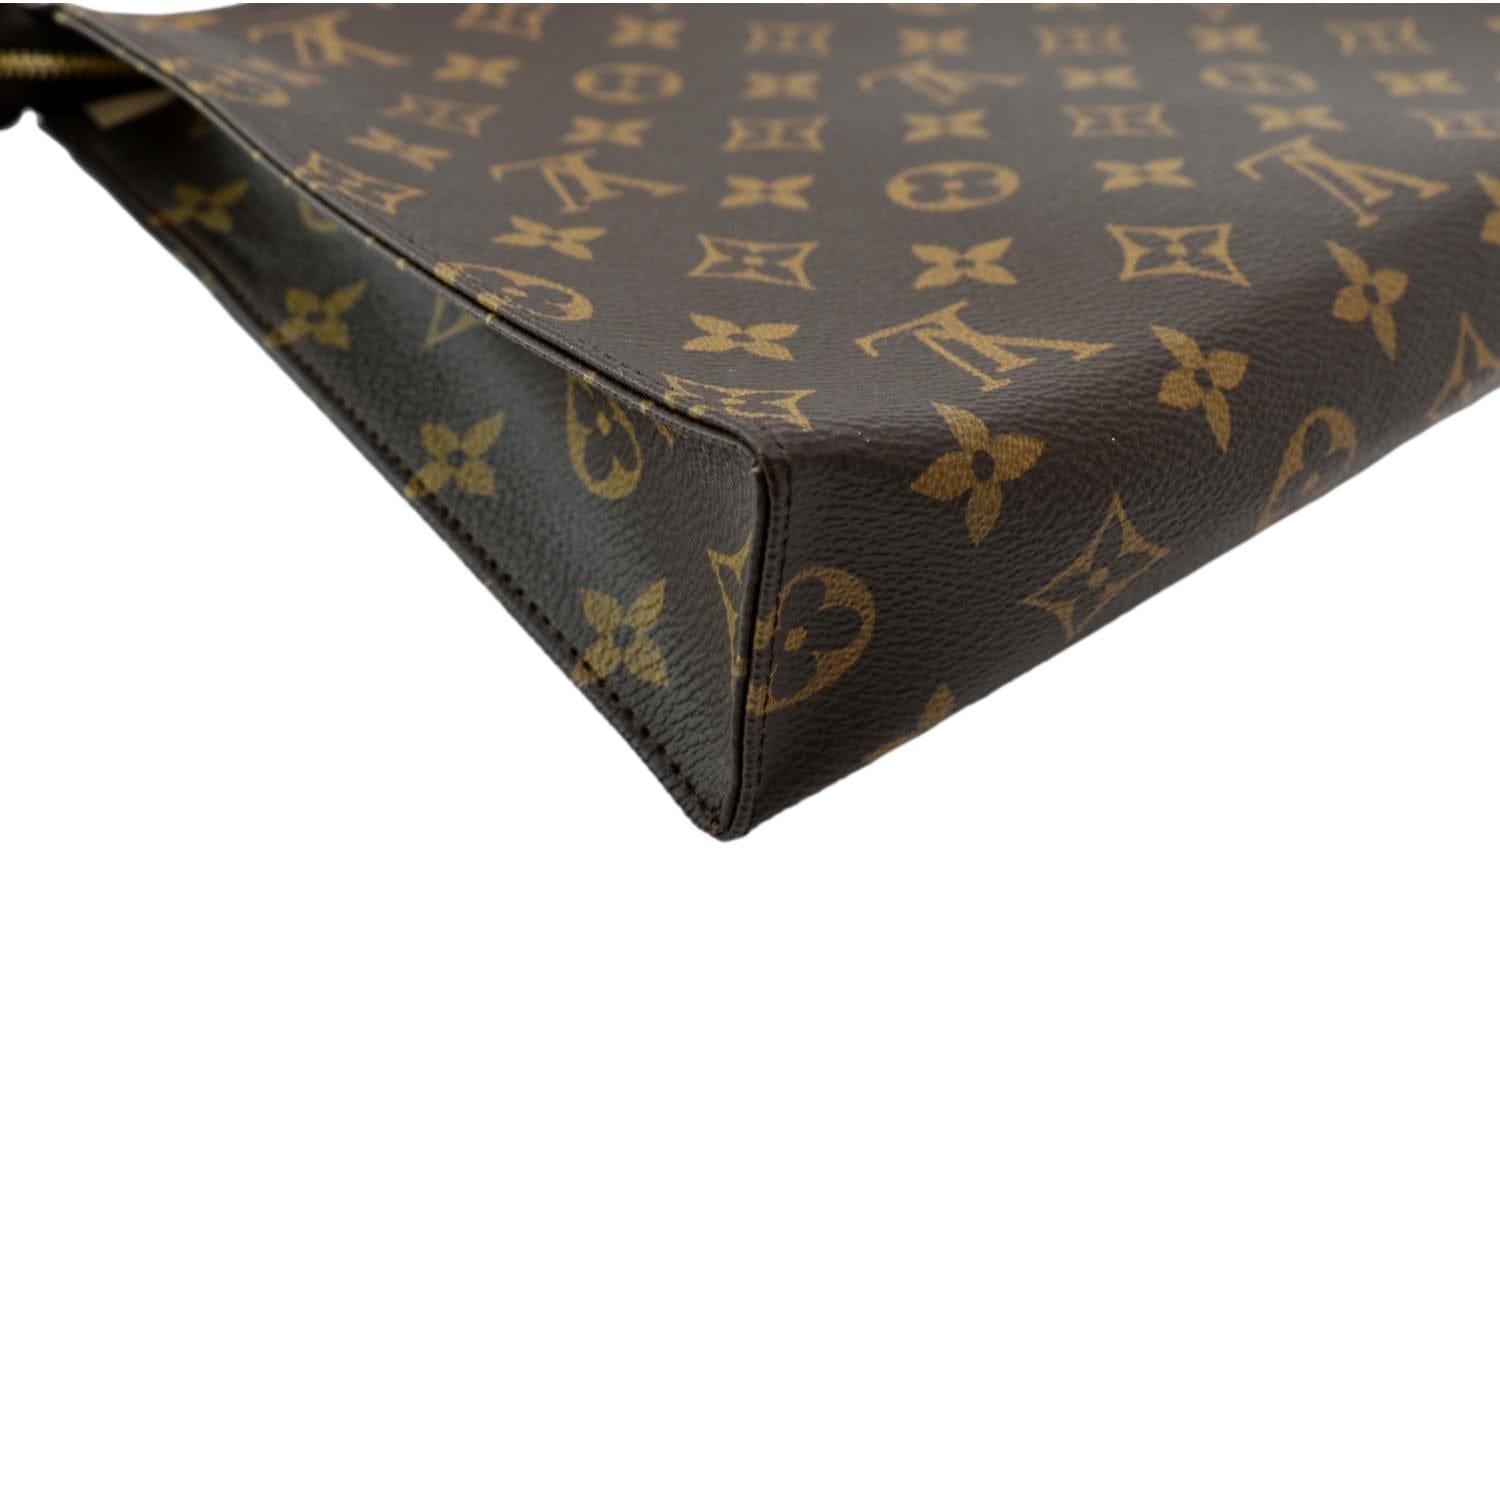 Louis Vuitton Discontinued Monogram Toiletry Pouch 26 Cosmetic Case 1224lv40